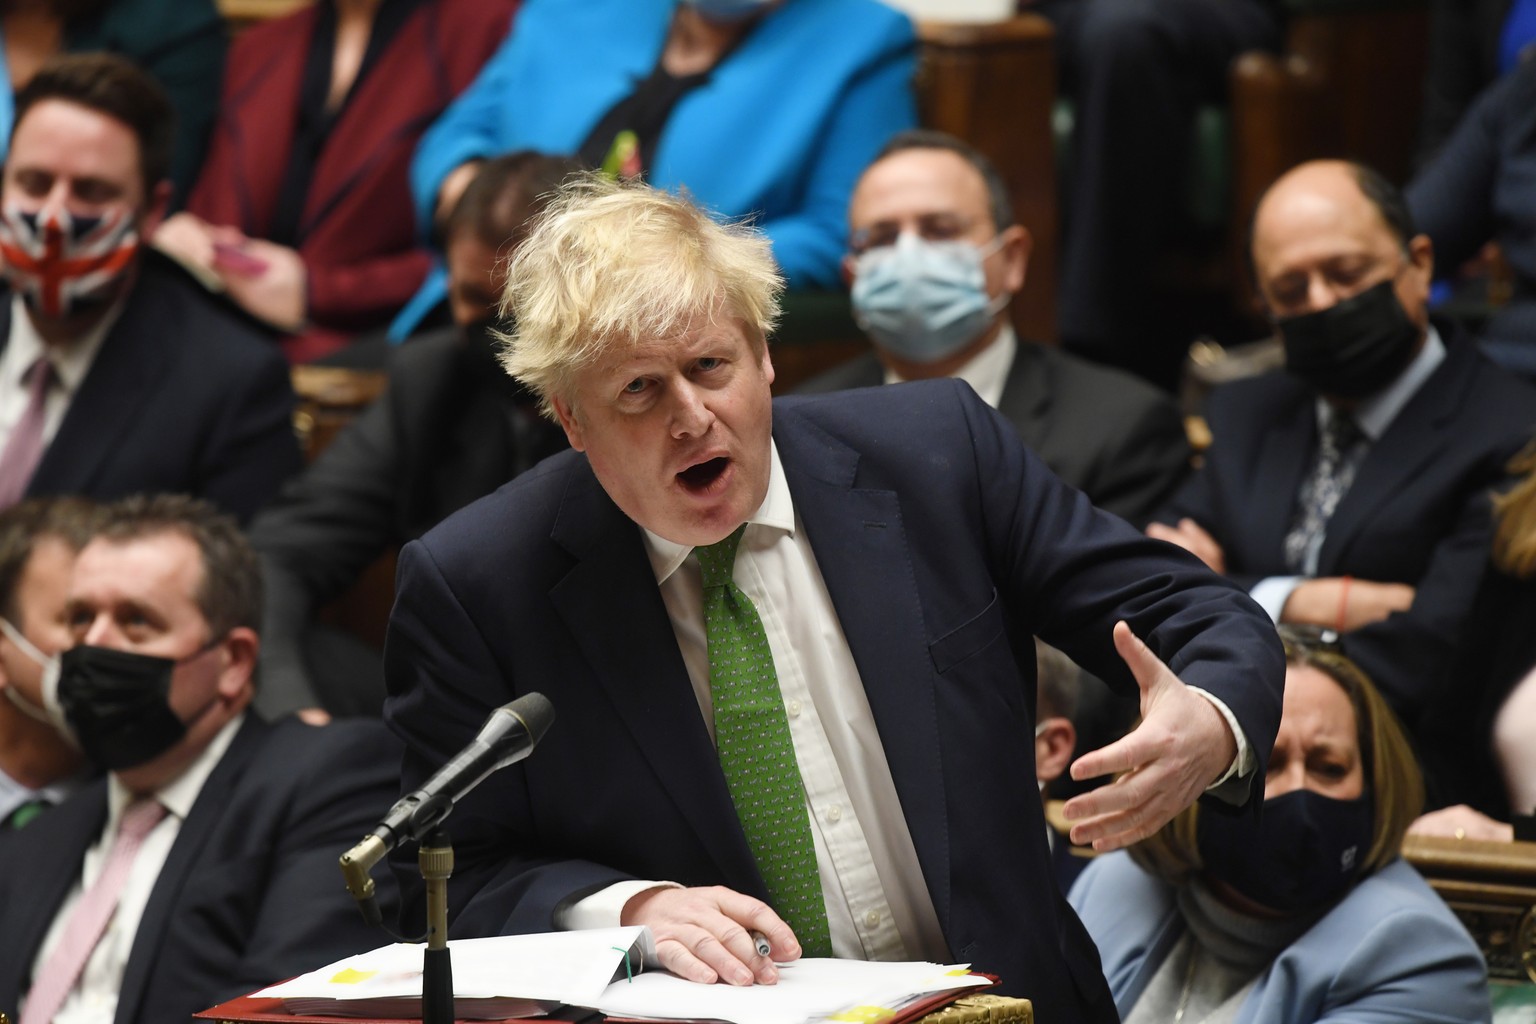 epa09695285 A handout photograph released by the UK Parliament shows British Prime Minister Boris Johnson speaking during Prime Minister&#039;s Questions (PMQs) at the House of Common in London, Brita ...